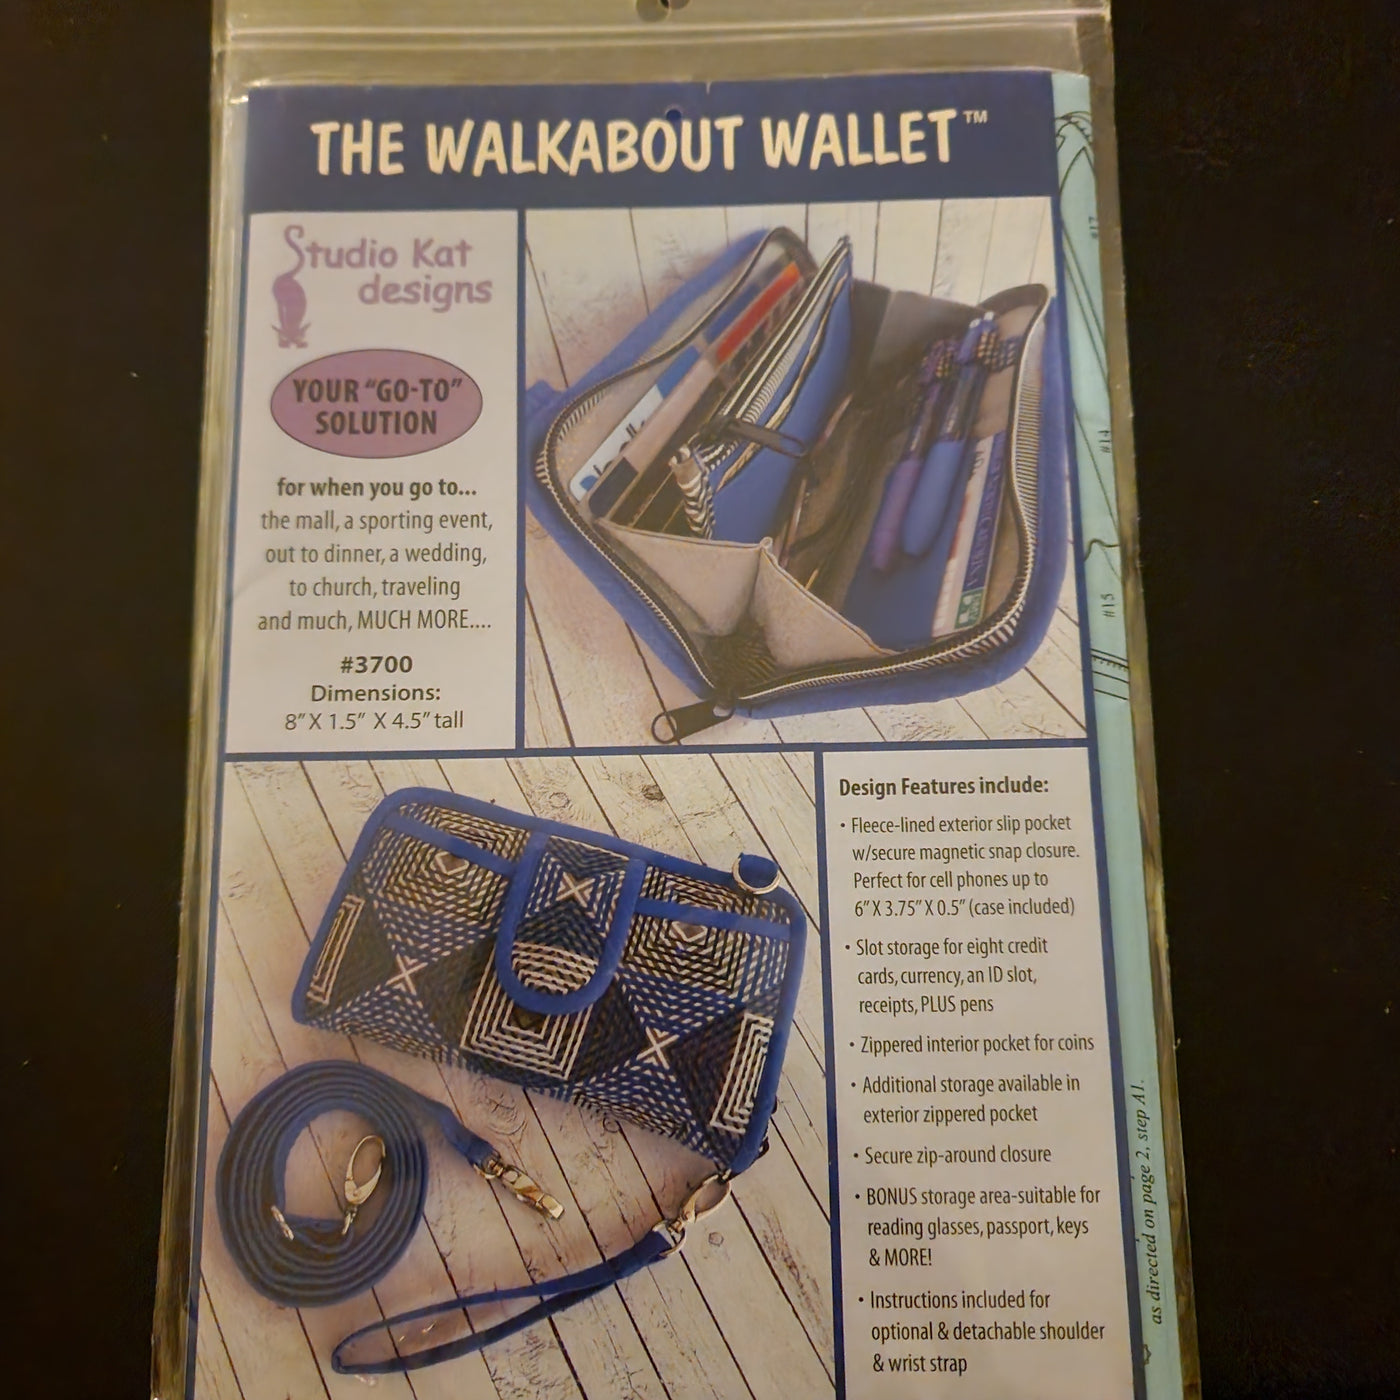 The Walkabout Wallet